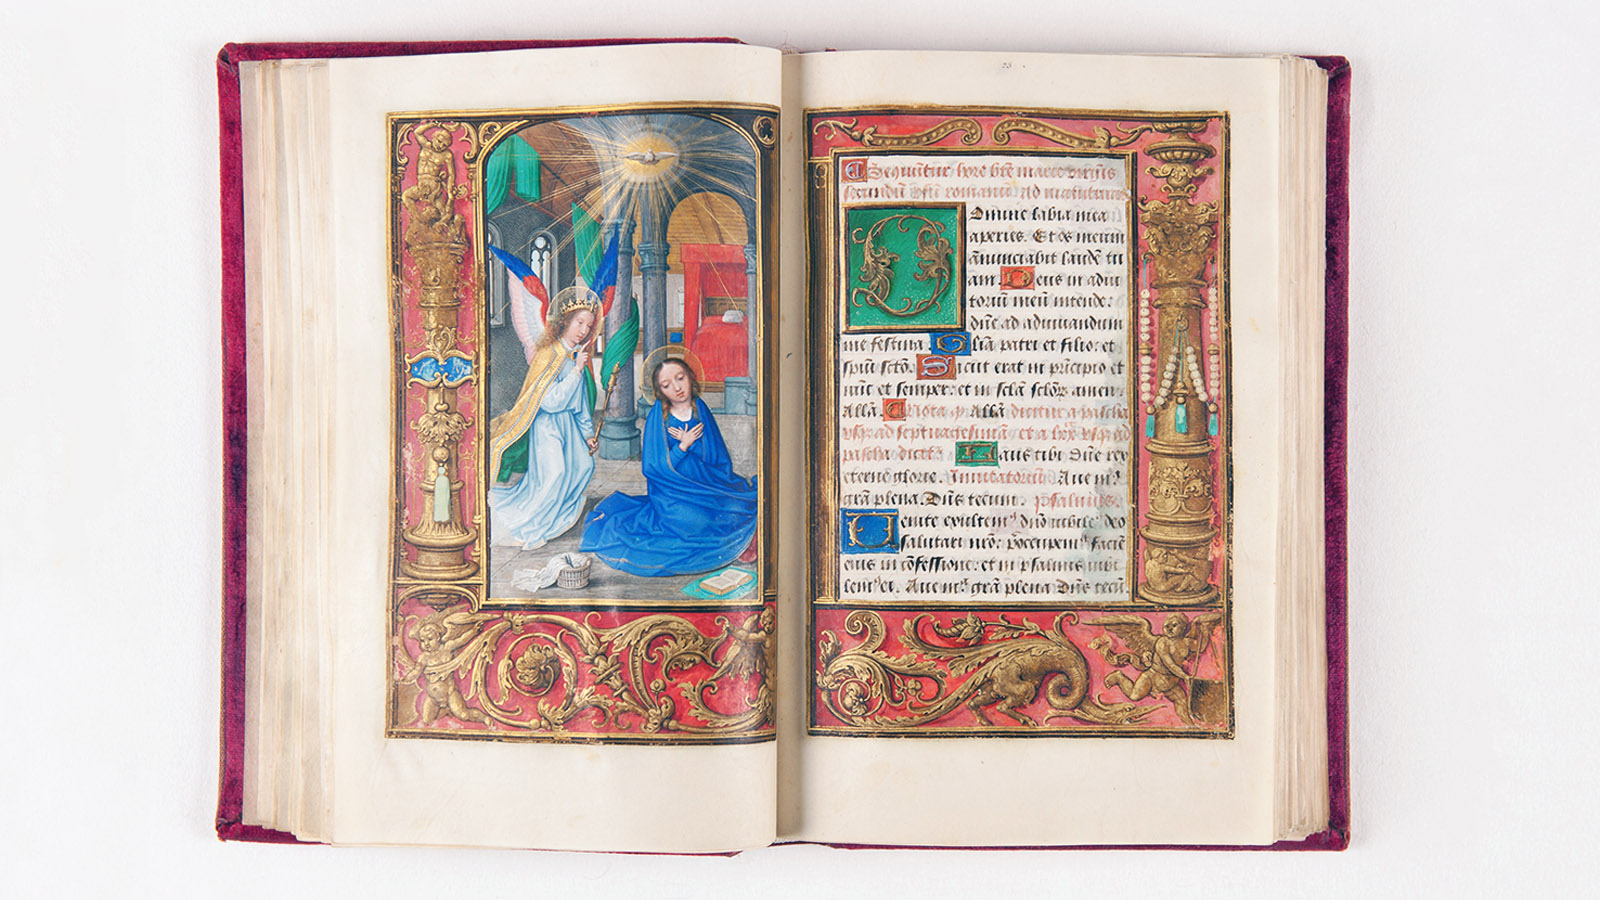 Book of Hours (The Holford Hours). Paintings by the Master of James IV of and assistant, and Simon Bening. Flanders (Bruges or Ghent), 1526. Manuscript on parchment. Fol. 15v – Patron kneeling at the altar. Fol. 24v – Annunciation. Calouste Gulbenkian Museum